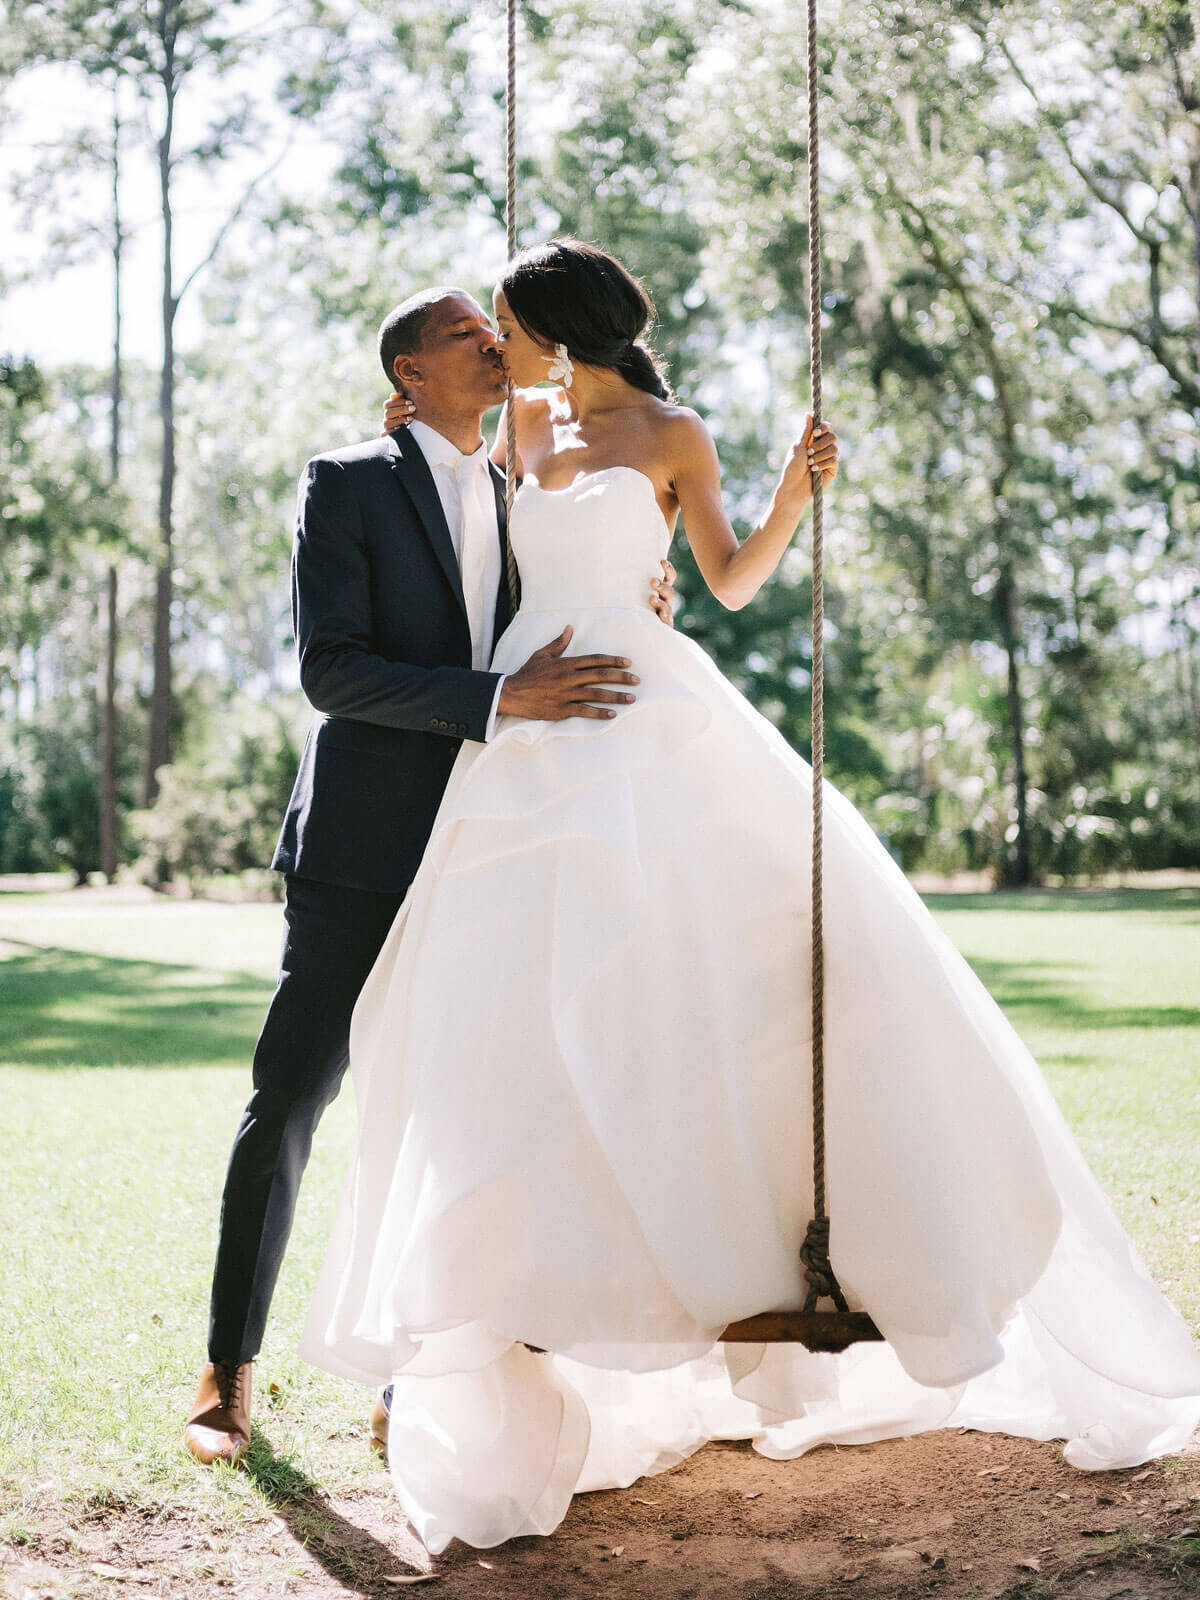 The bride is standing in a swing, while kissing the groom in Montage at Palmetto Bluff. Destination wedding image by Jenny Fu Studio